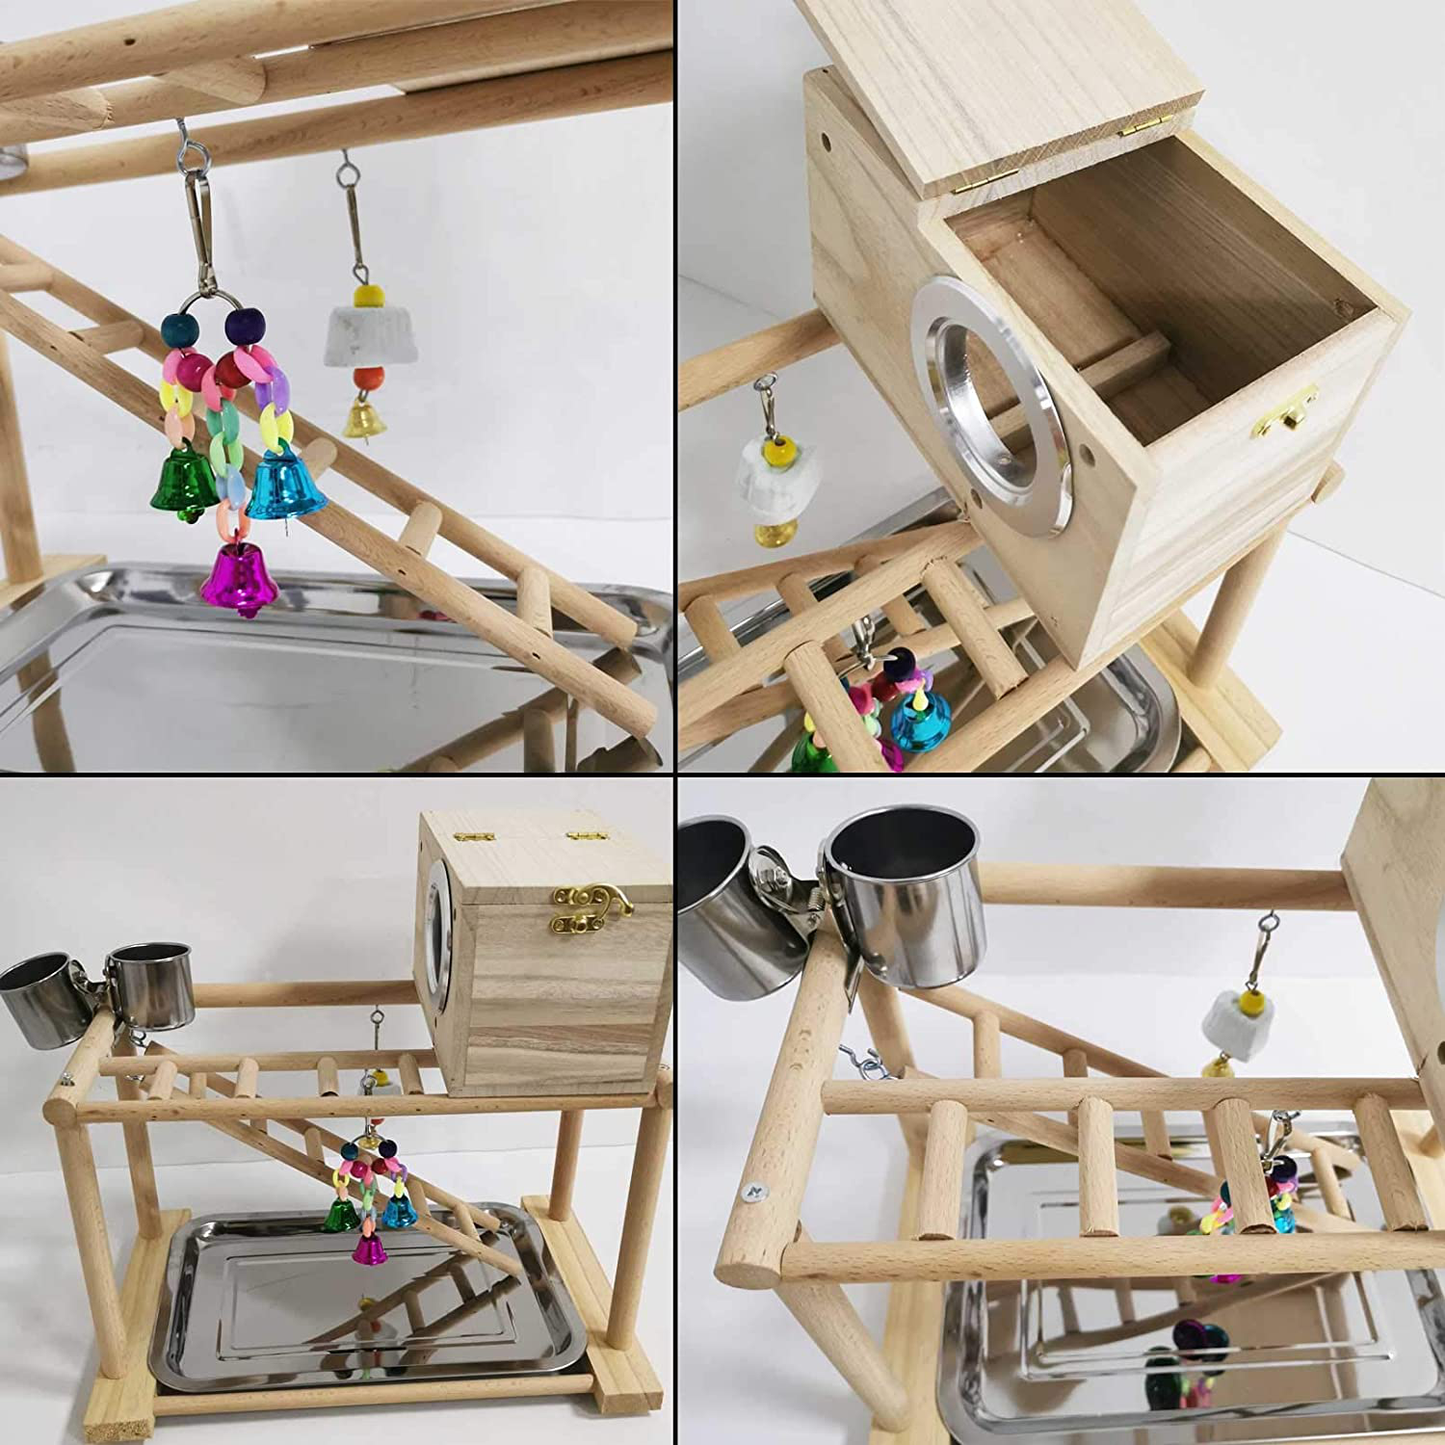 Kathson Parrots Playground Bird Playstand Birdcage Play Stand Wood Perch Gym Playpen with Parakeet Nest Box Ladder Feeder Cups Chewing Toys Exercise Activity Center for Conure Cockatiel Lovebirds Animals & Pet Supplies > Pet Supplies > Bird Supplies > Bird Gyms & Playstands kathson   